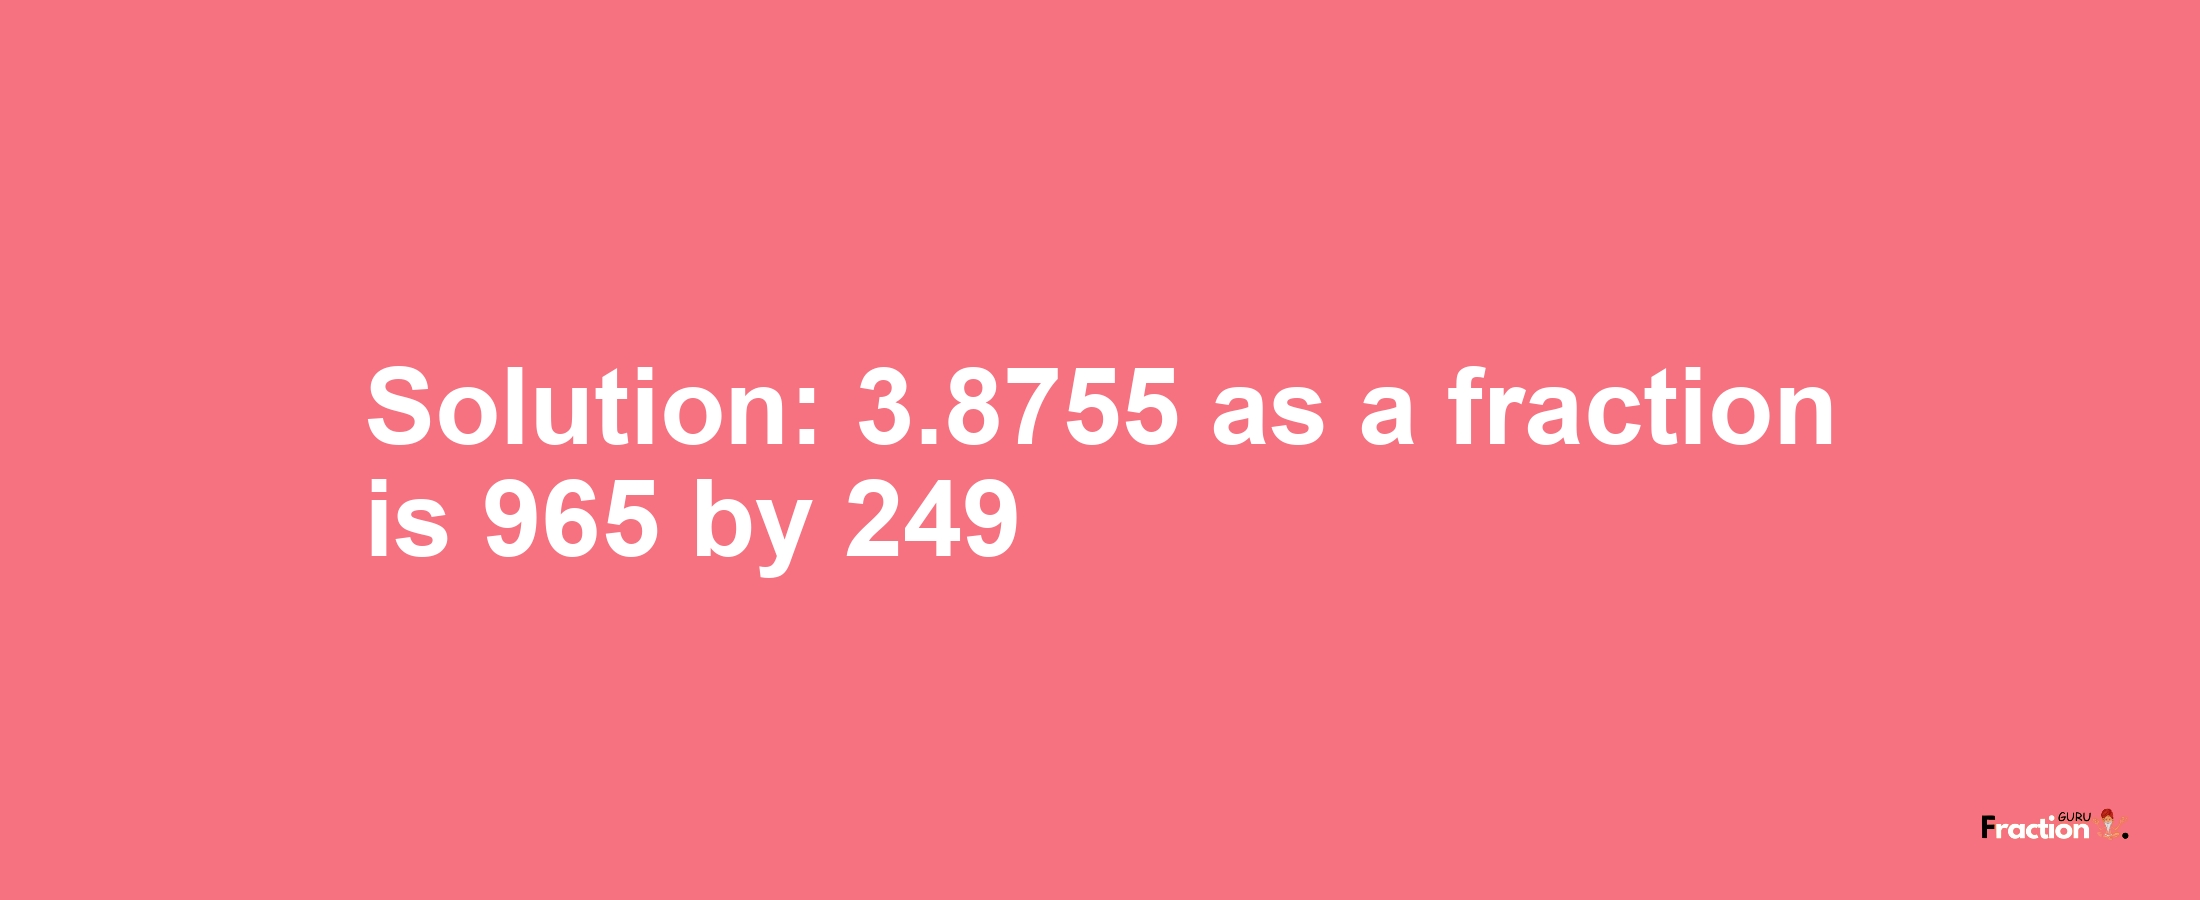 Solution:3.8755 as a fraction is 965/249